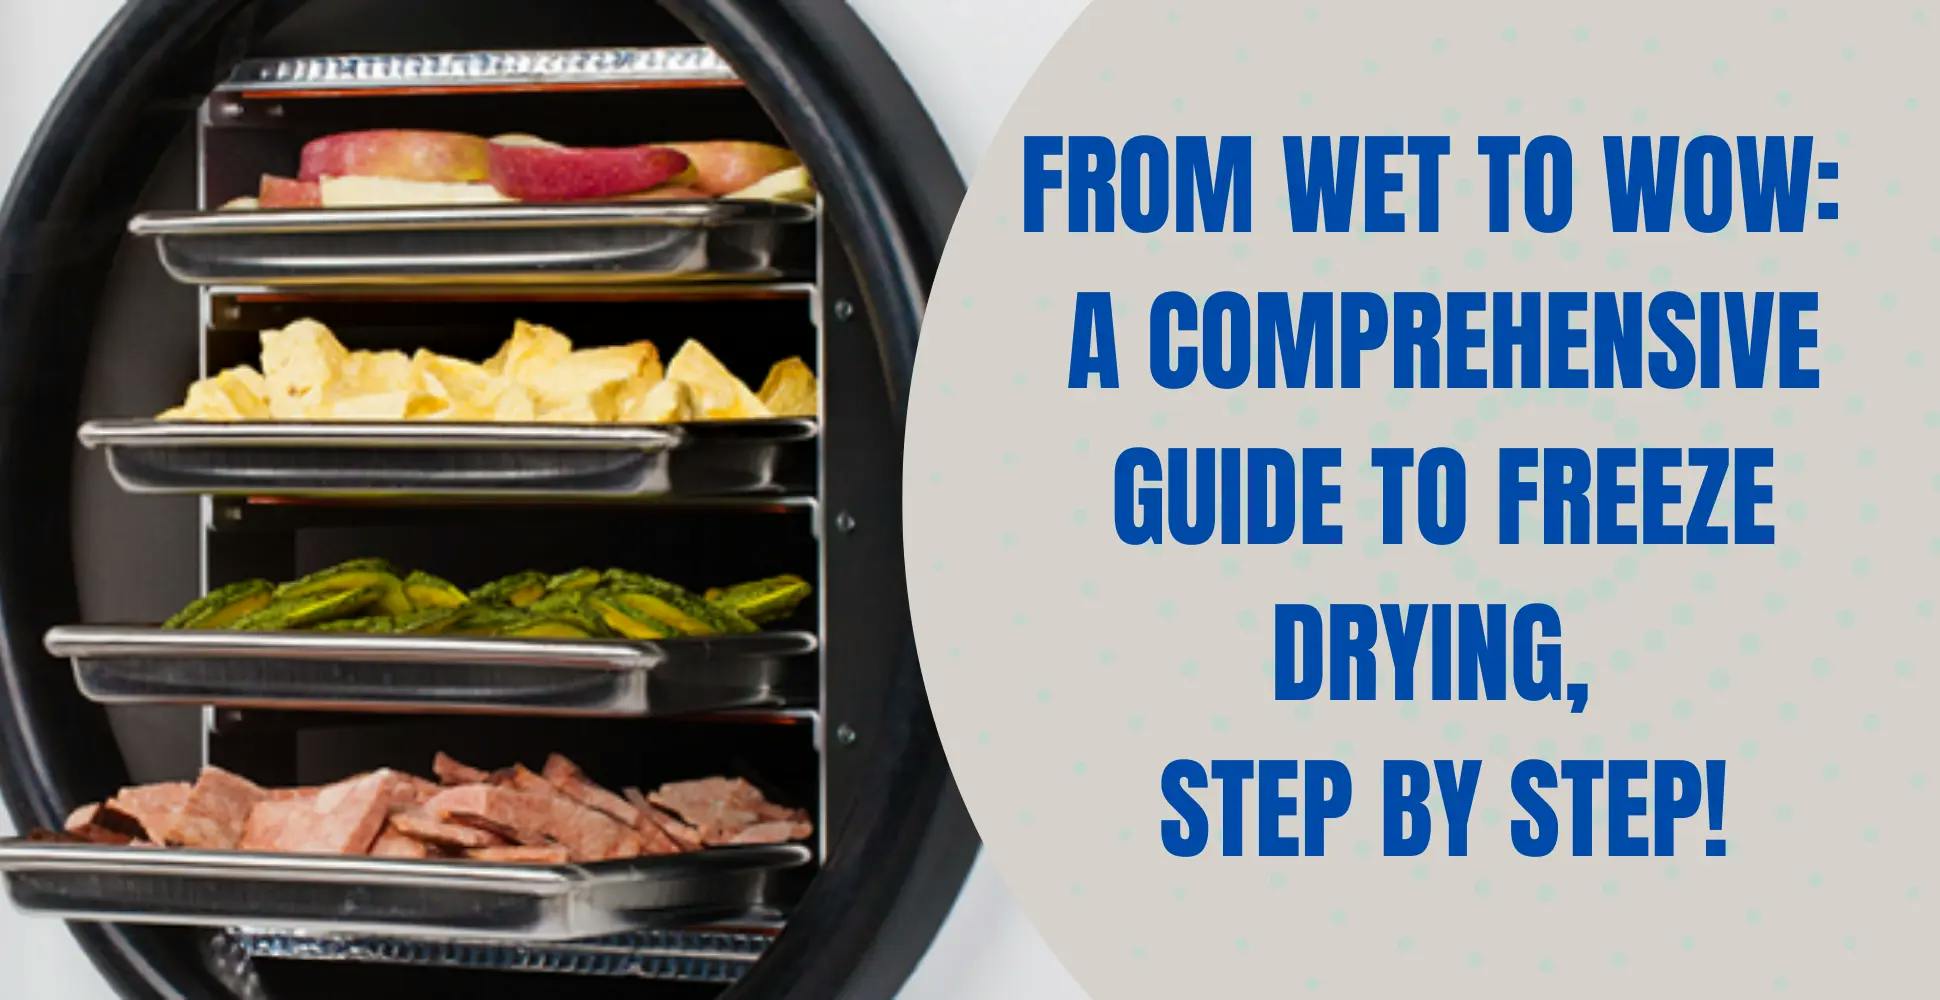 Step-by-Step Guide to Freeze Drying